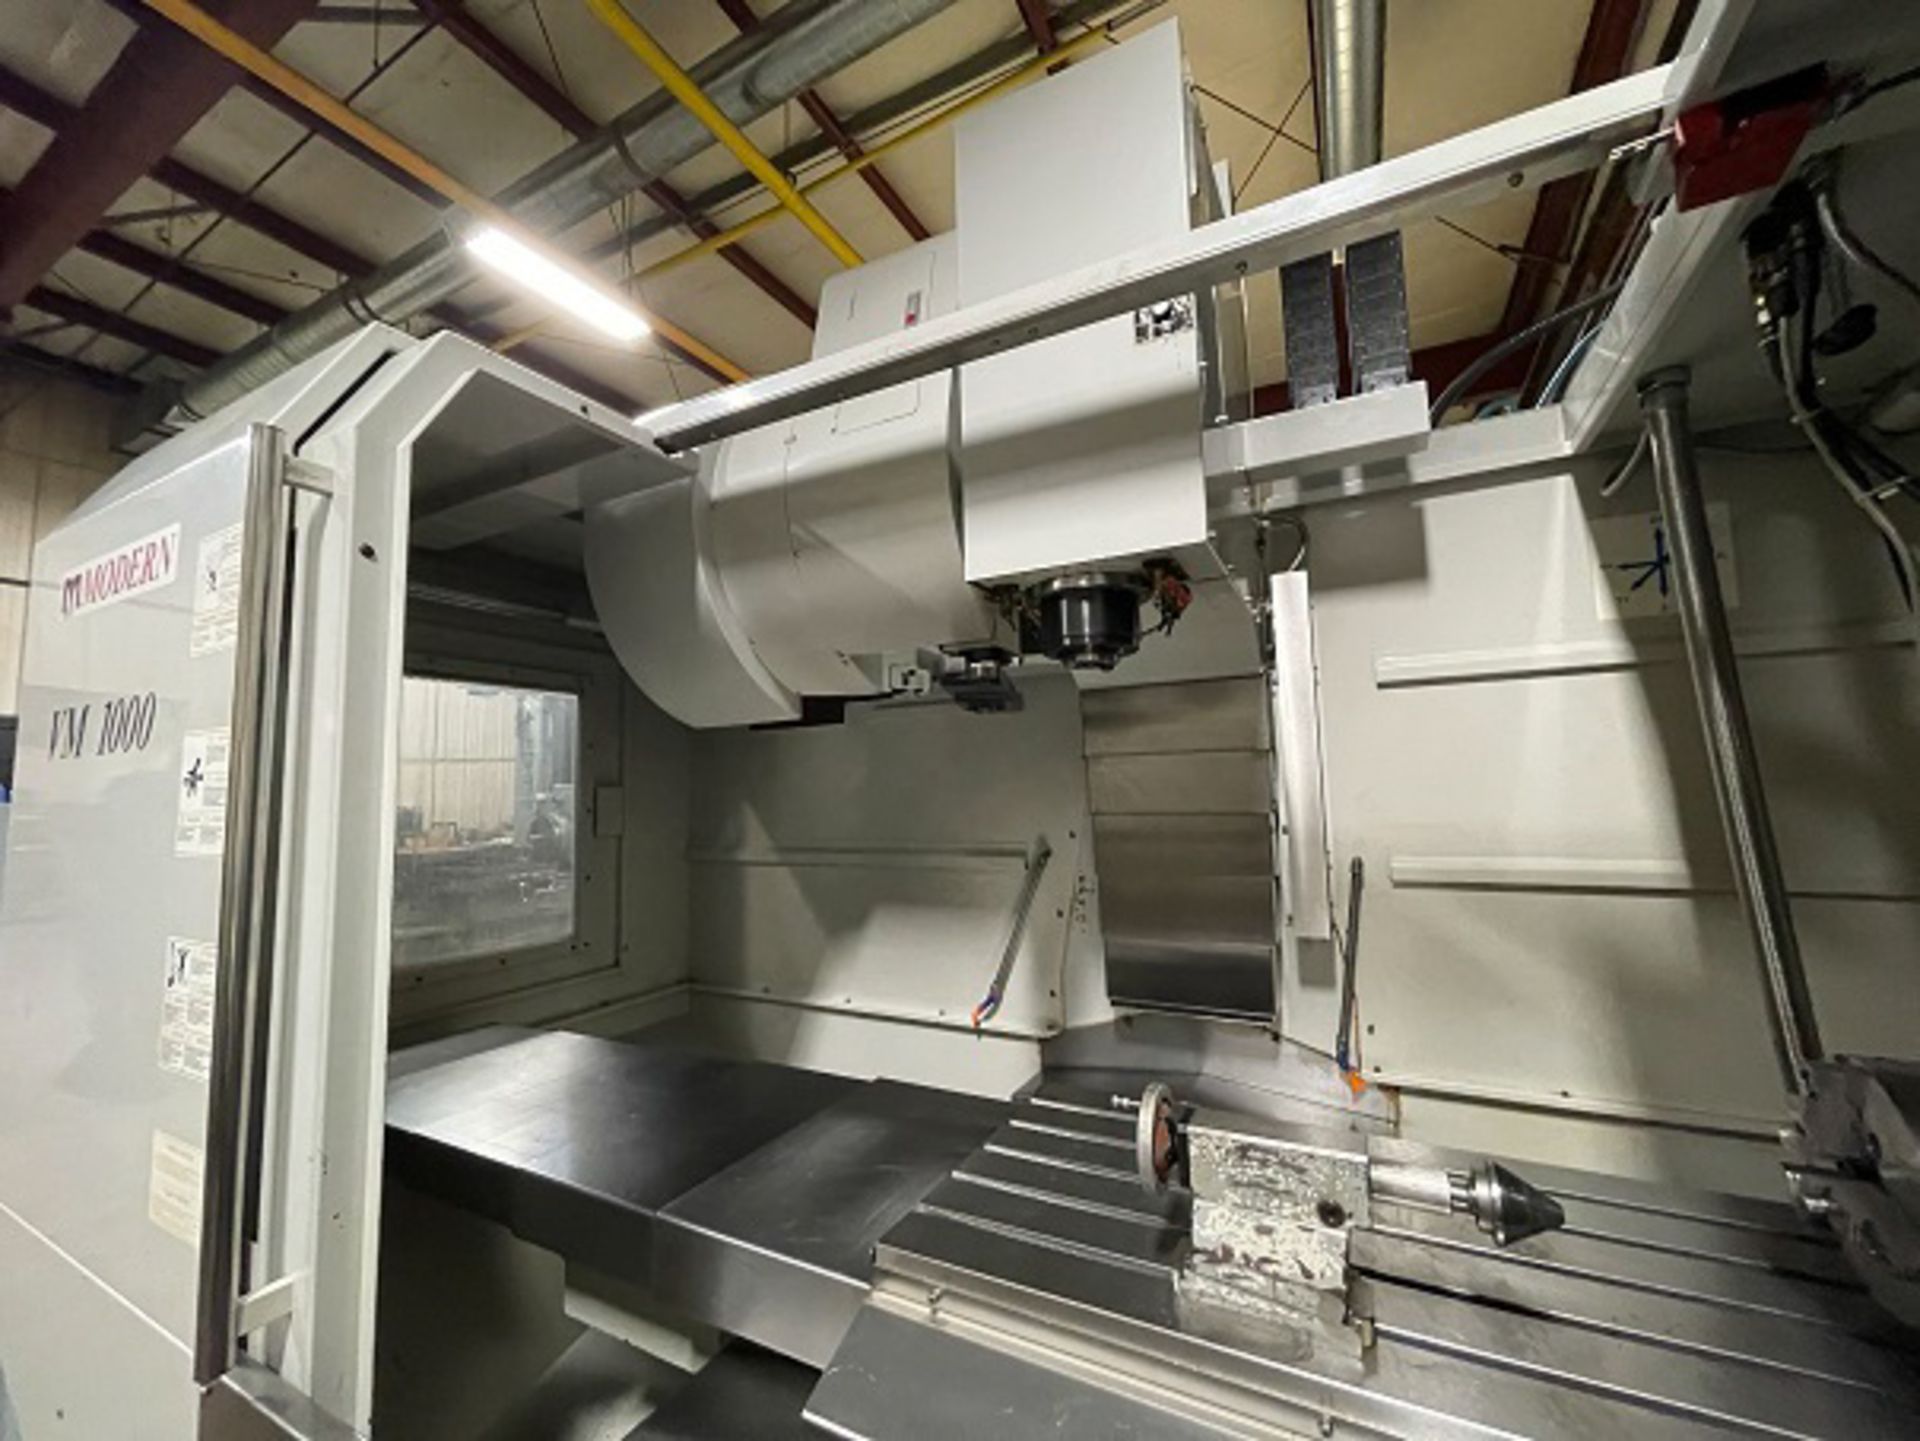 MODERN (2004) VM-1000 HIGH SPEED CNC VERTICAL MACHINING CENTER WITH FAGOR 8055M CNC CONTROL, 19" X - Image 12 of 23